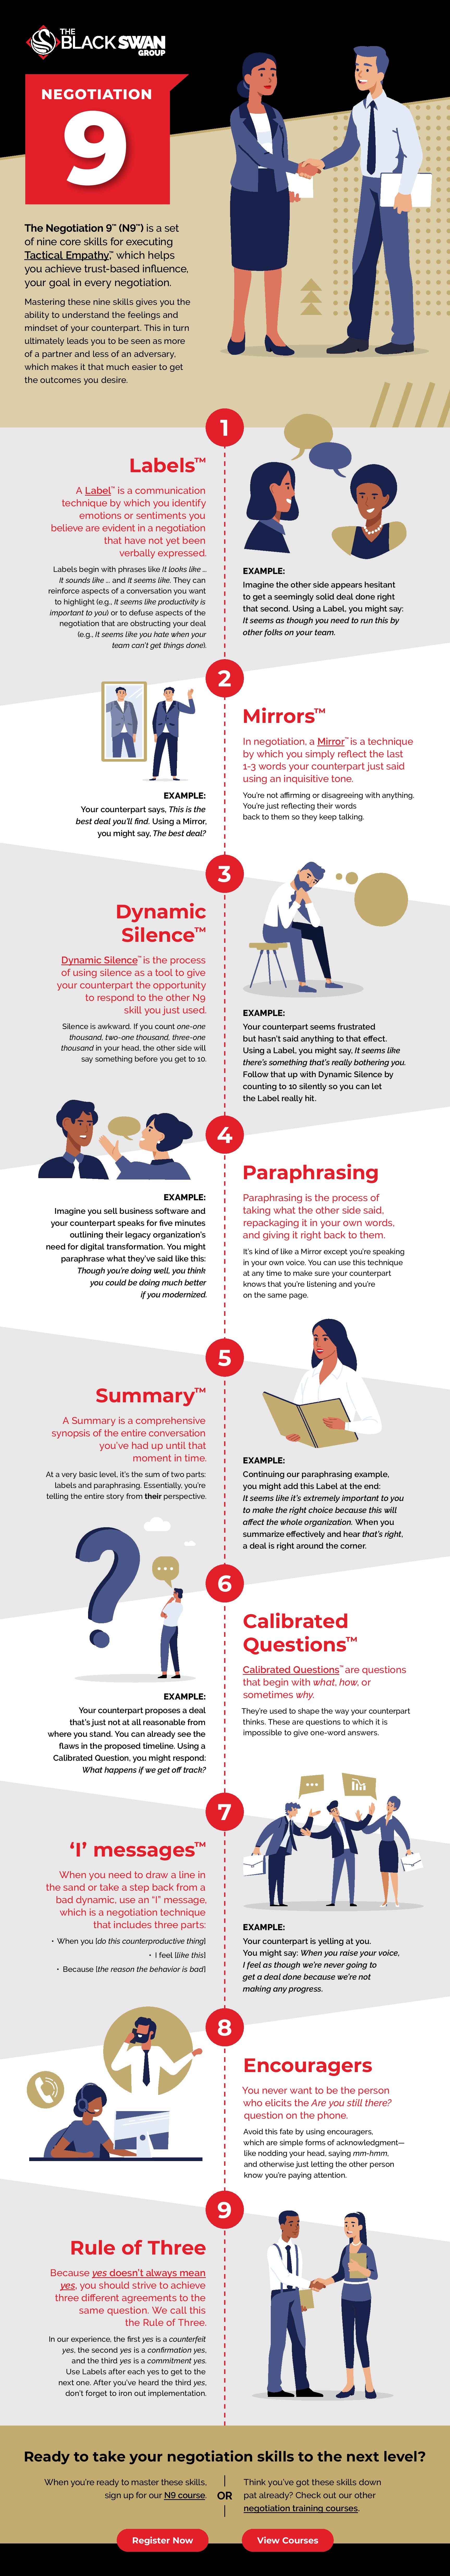 Infographic: The Black Swan Group's Negotiation 9™️️️ (N9™️️️)